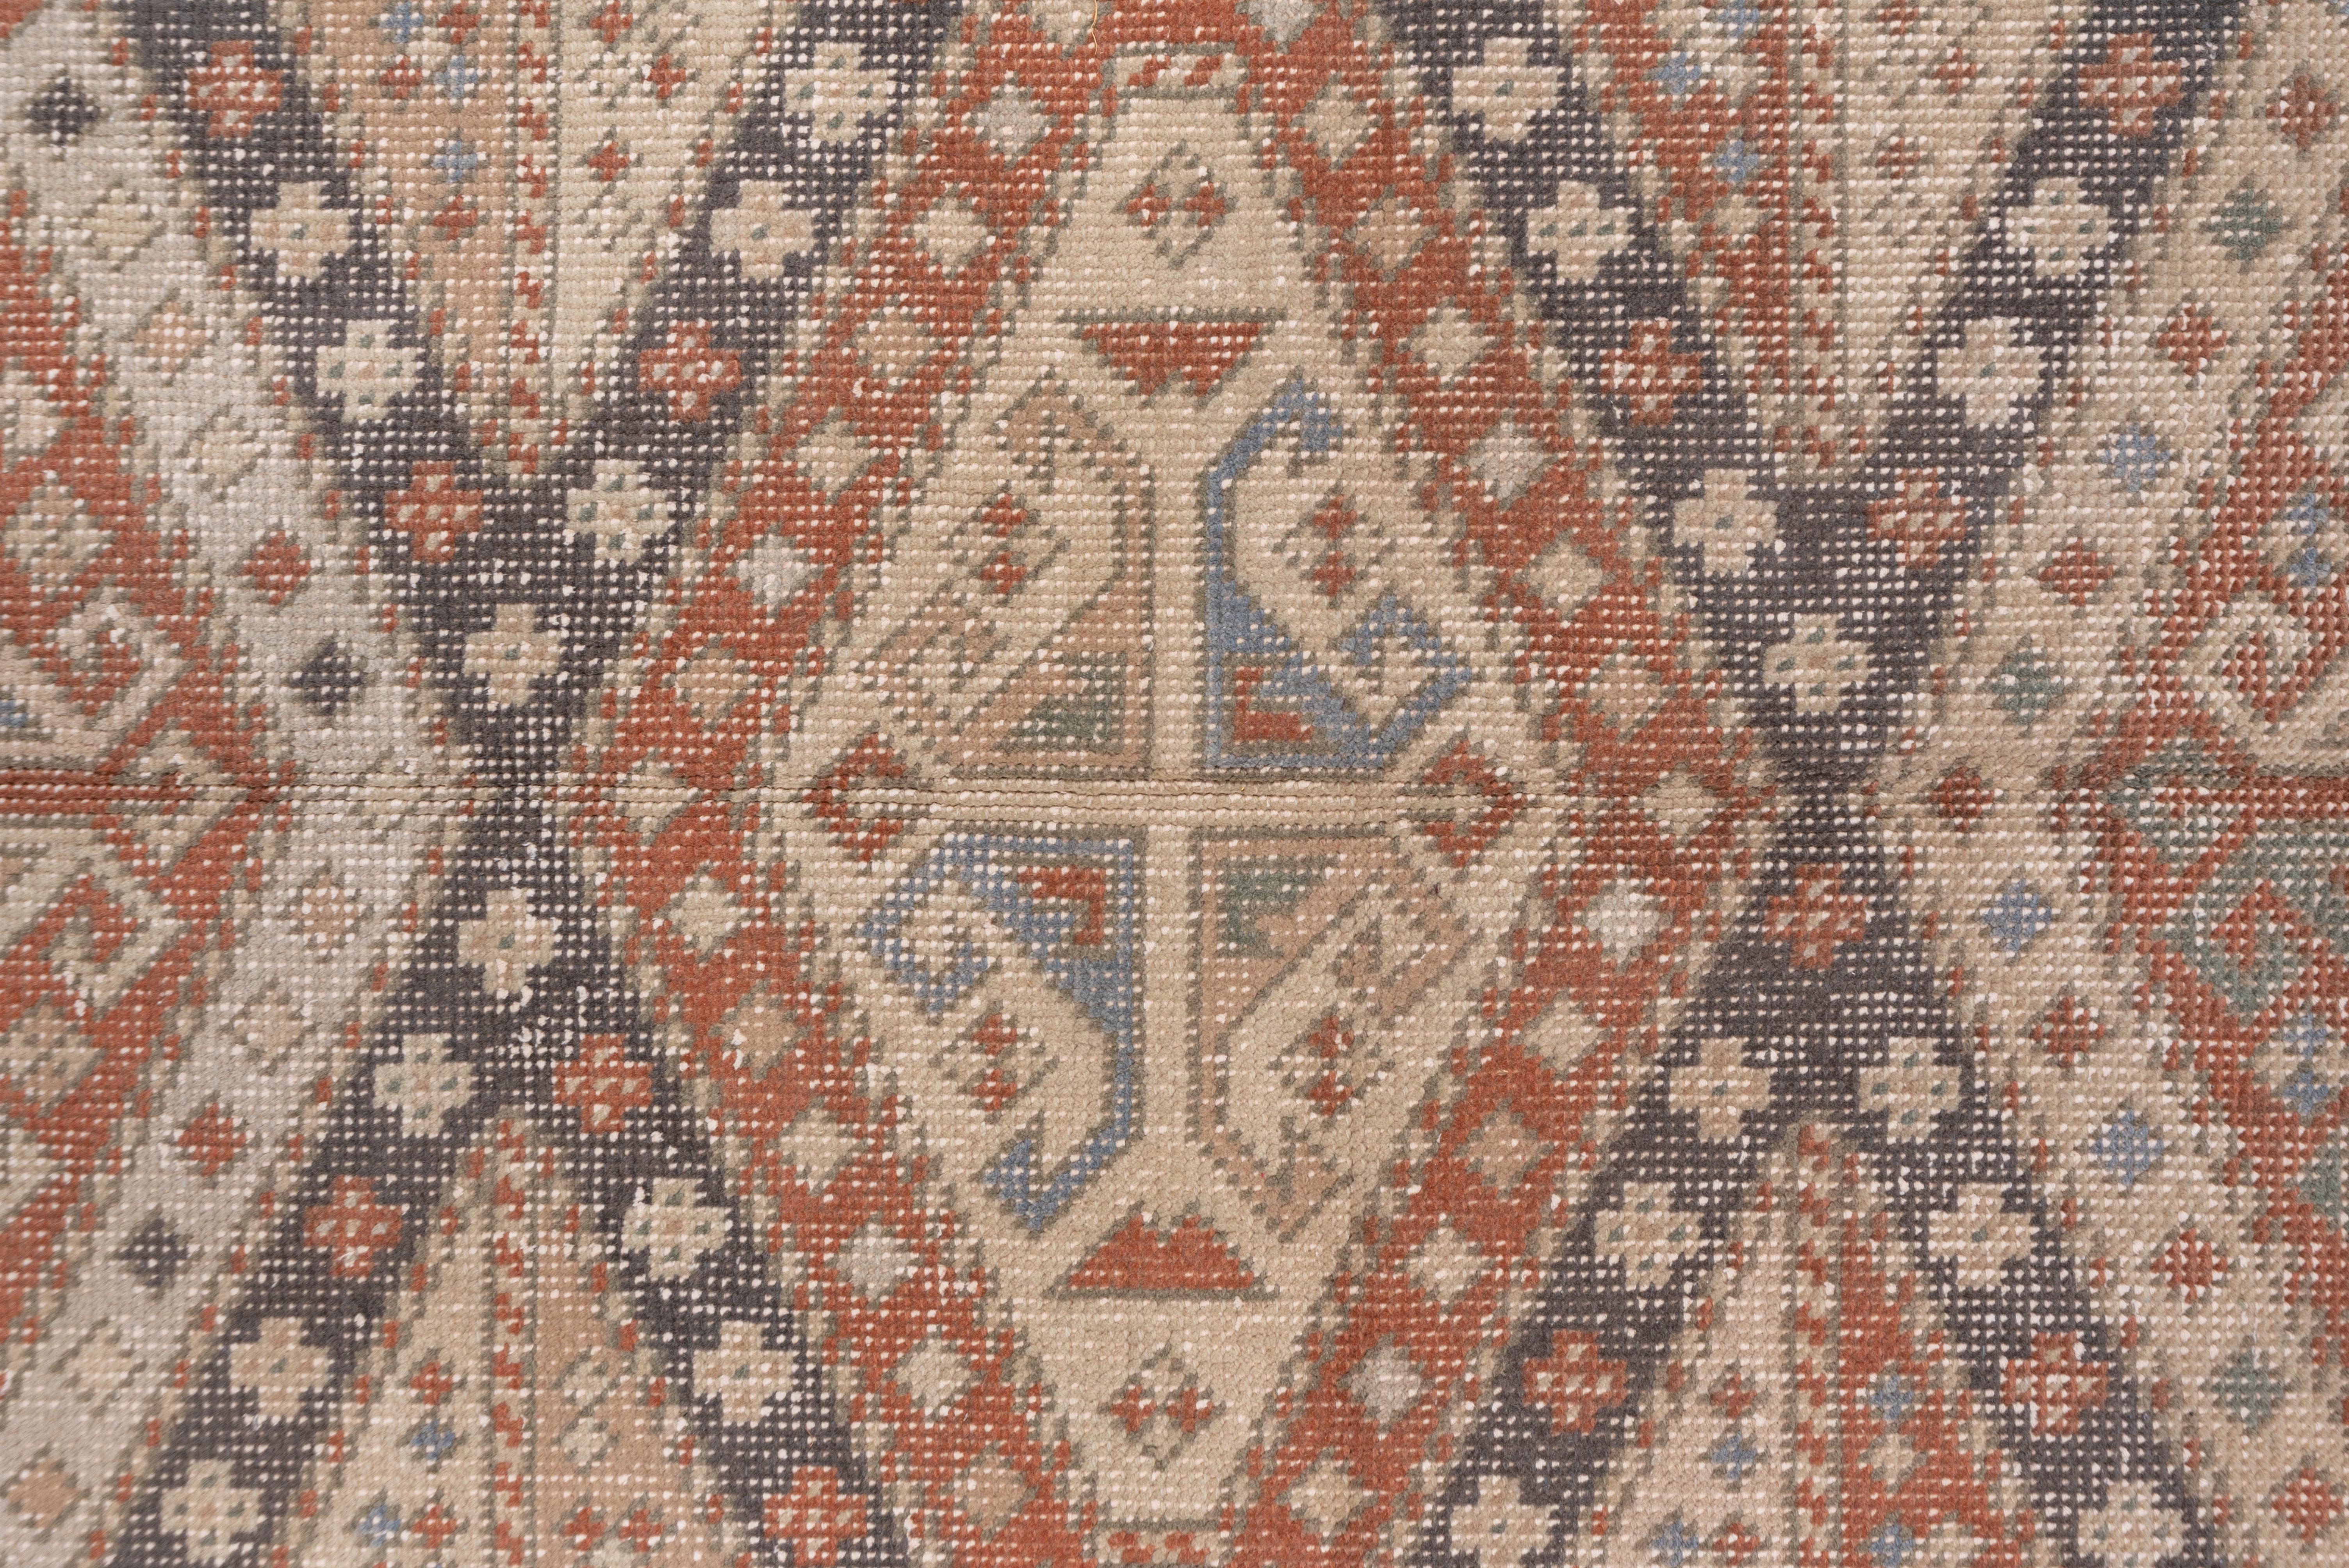 Vintage Tribal Turkish Sparta Carpet Geometric Design, Brown, Ivory & Blue Tones In Good Condition For Sale In New York, NY